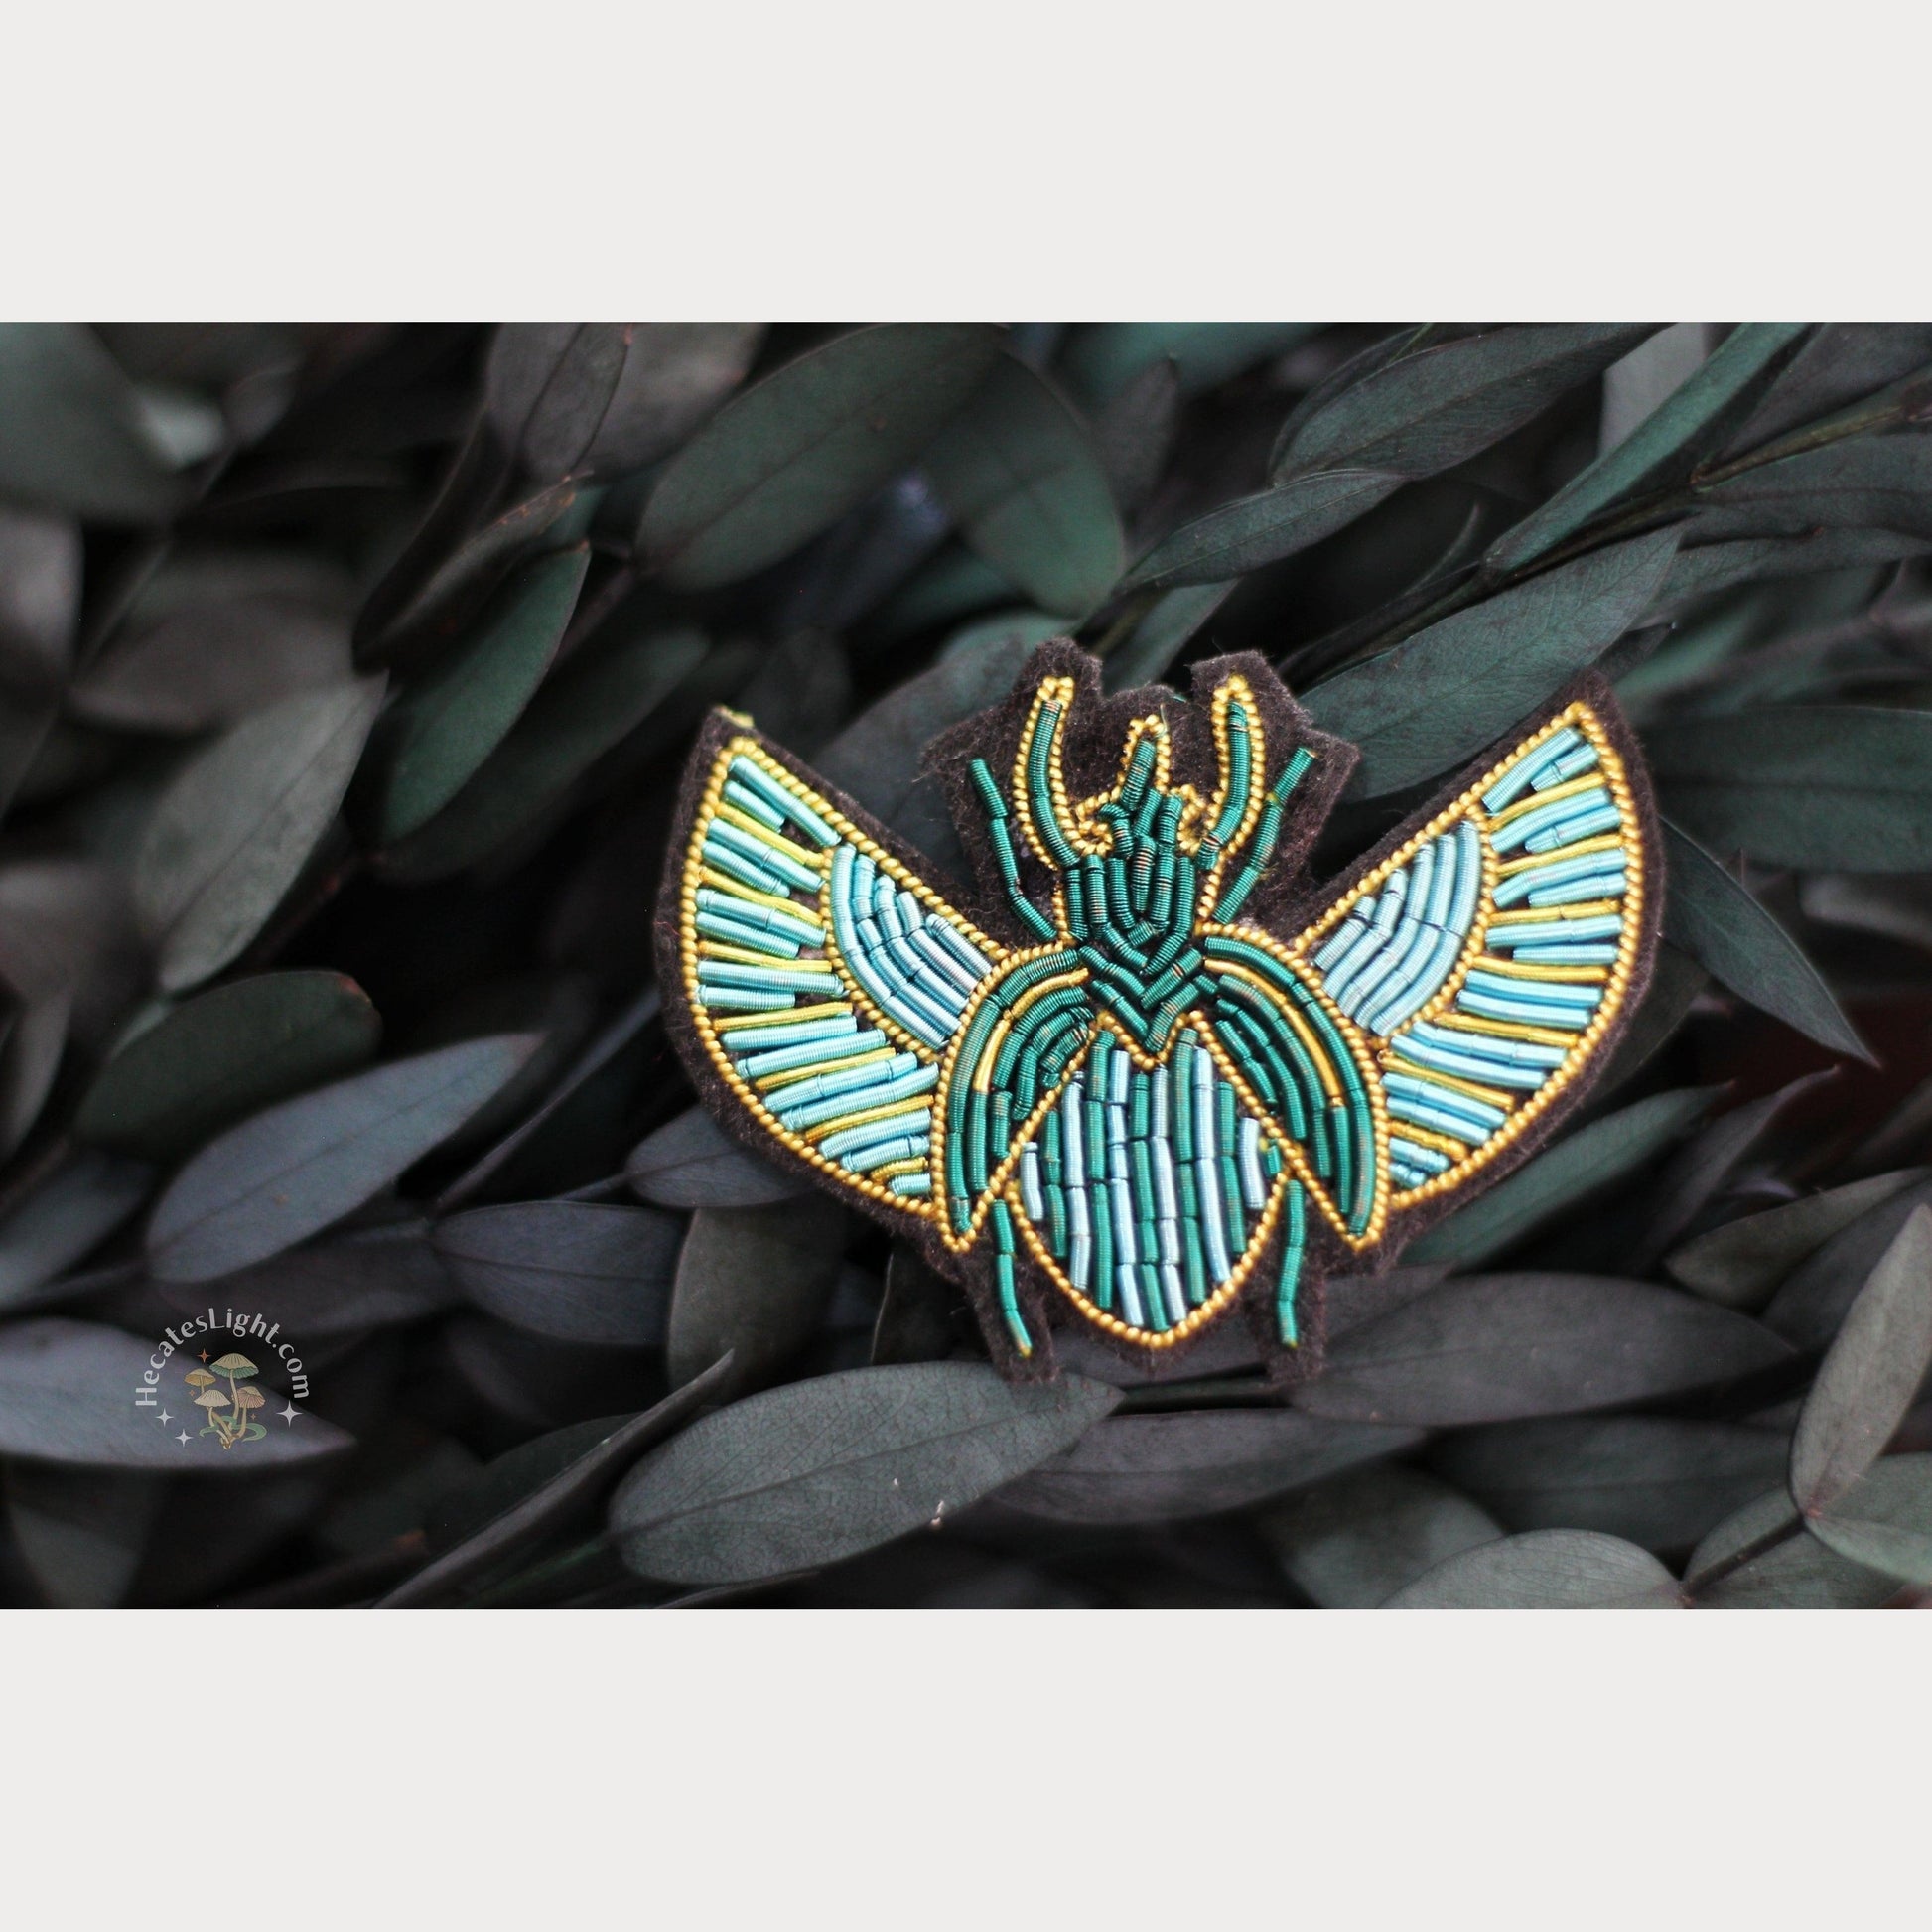 Scarab Beetle Pin MALICIEUSE beetle, blue, bug, calgary, canada, cloth, egyptian, gift, gold, pin, scarab, turquoise, clothing, witchy gift Scarab Beetle Pin MALICIEUSE beetle, blue, bug, calgary, canada, cloth, egyptian, gift, gold, pin, scarab, turquoise, clothing, witchy gift metaphysical occult supplies witchy hecateslight.com witchcraft cottagecore witch gifts metaphysical occult supplies witchy hecateslight.com witchcraft cottagecore witch gifts